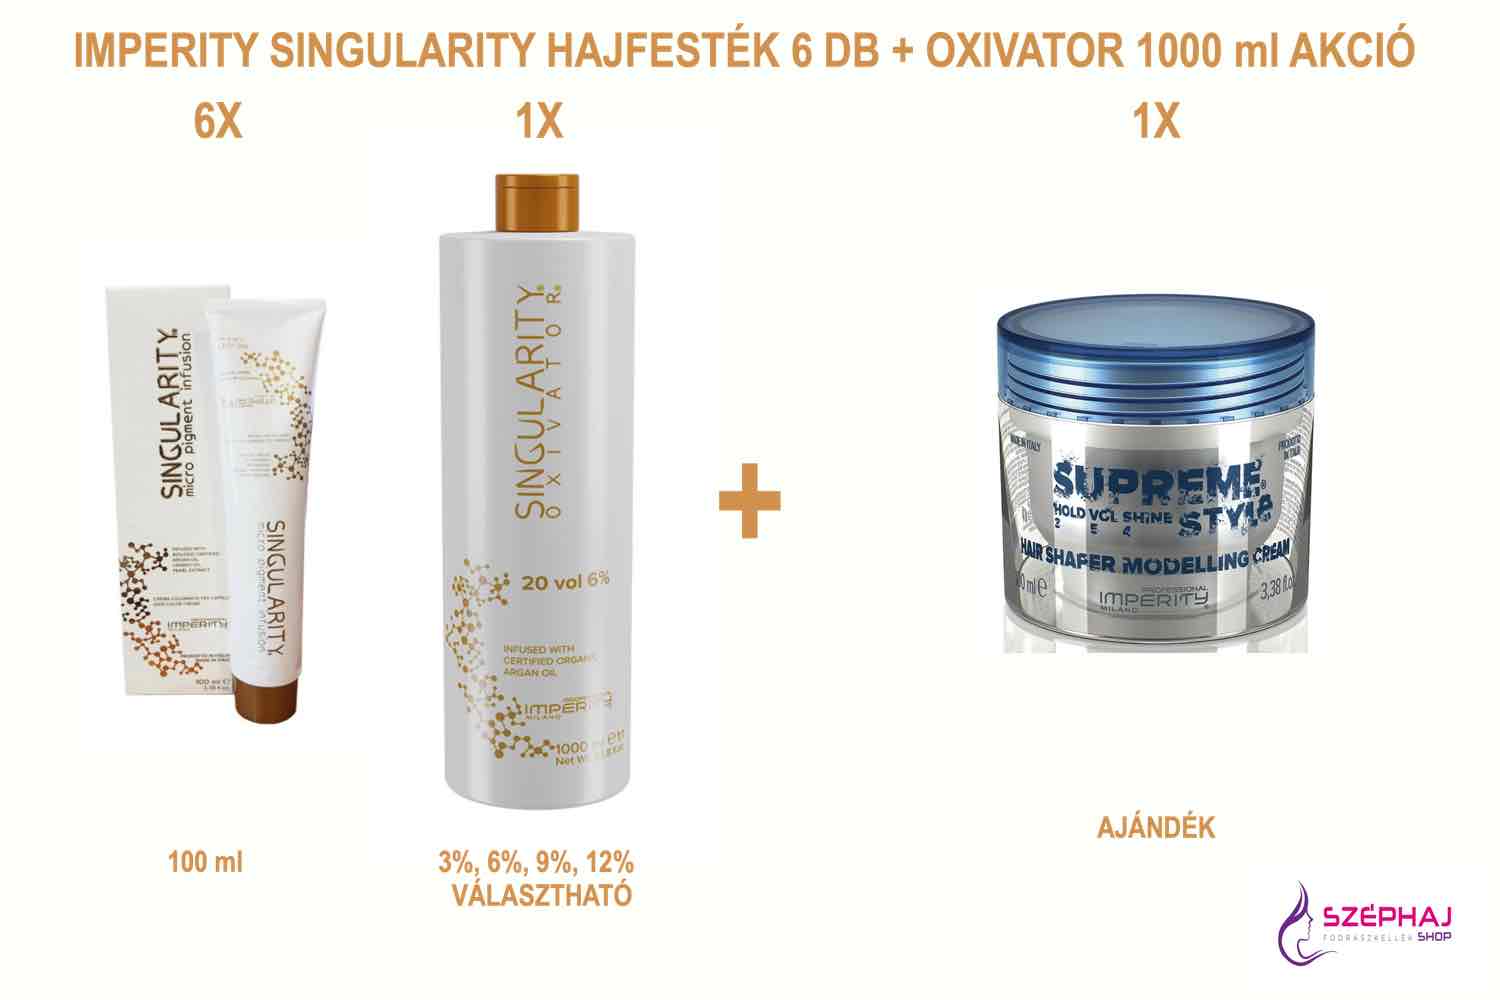 01A IMPERITY Singularity Hair Color 6 + OXIVATOR 1000 ml AKCIÓ